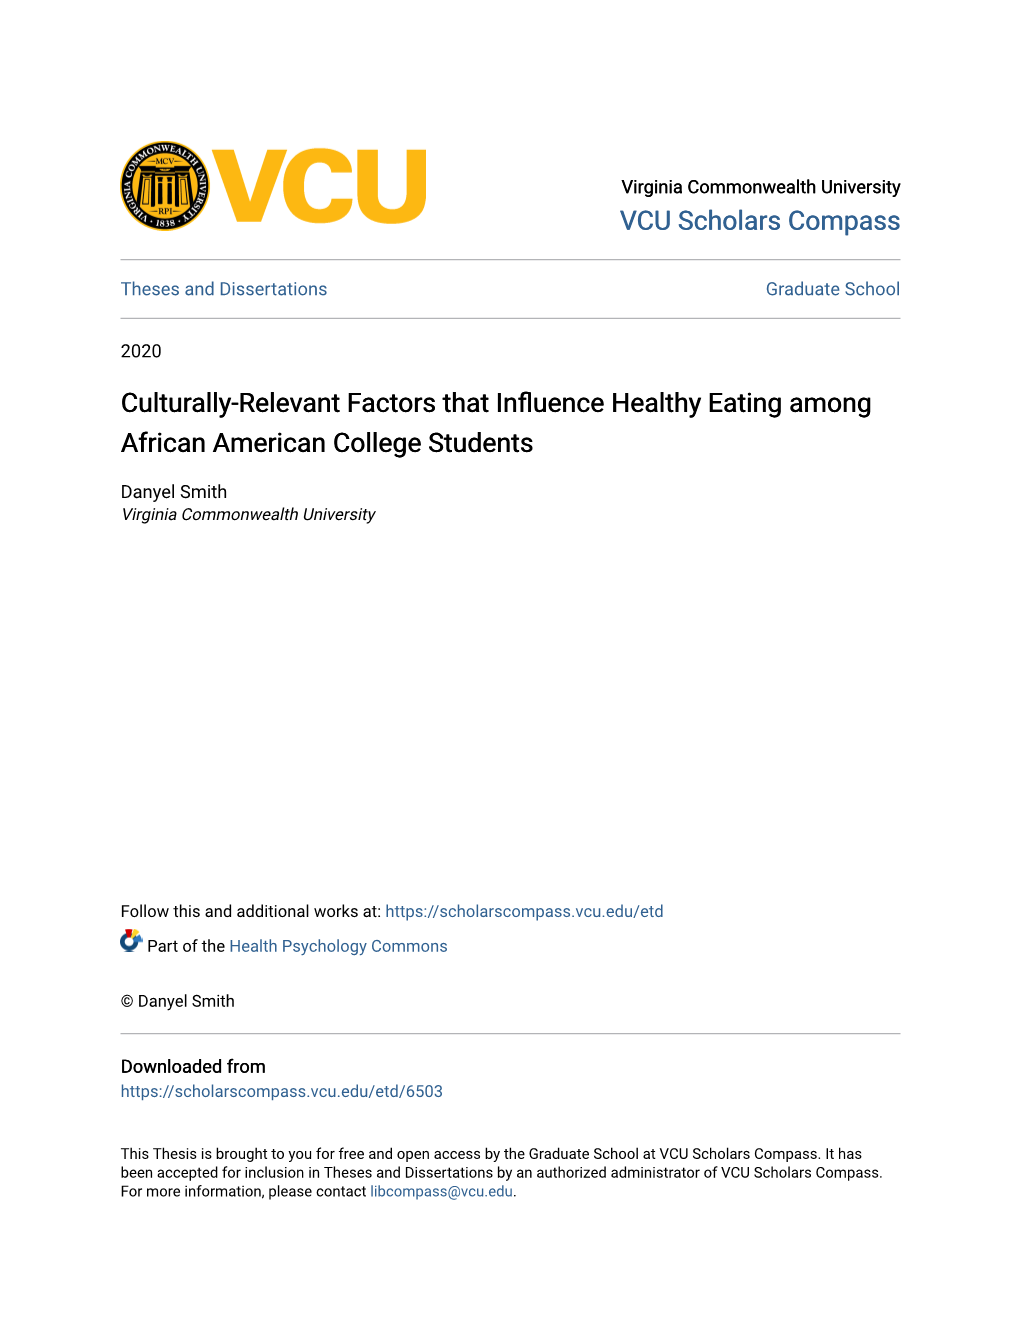 Culturally-Relevant Factors That Influence Healthy Eating Among African American College Students